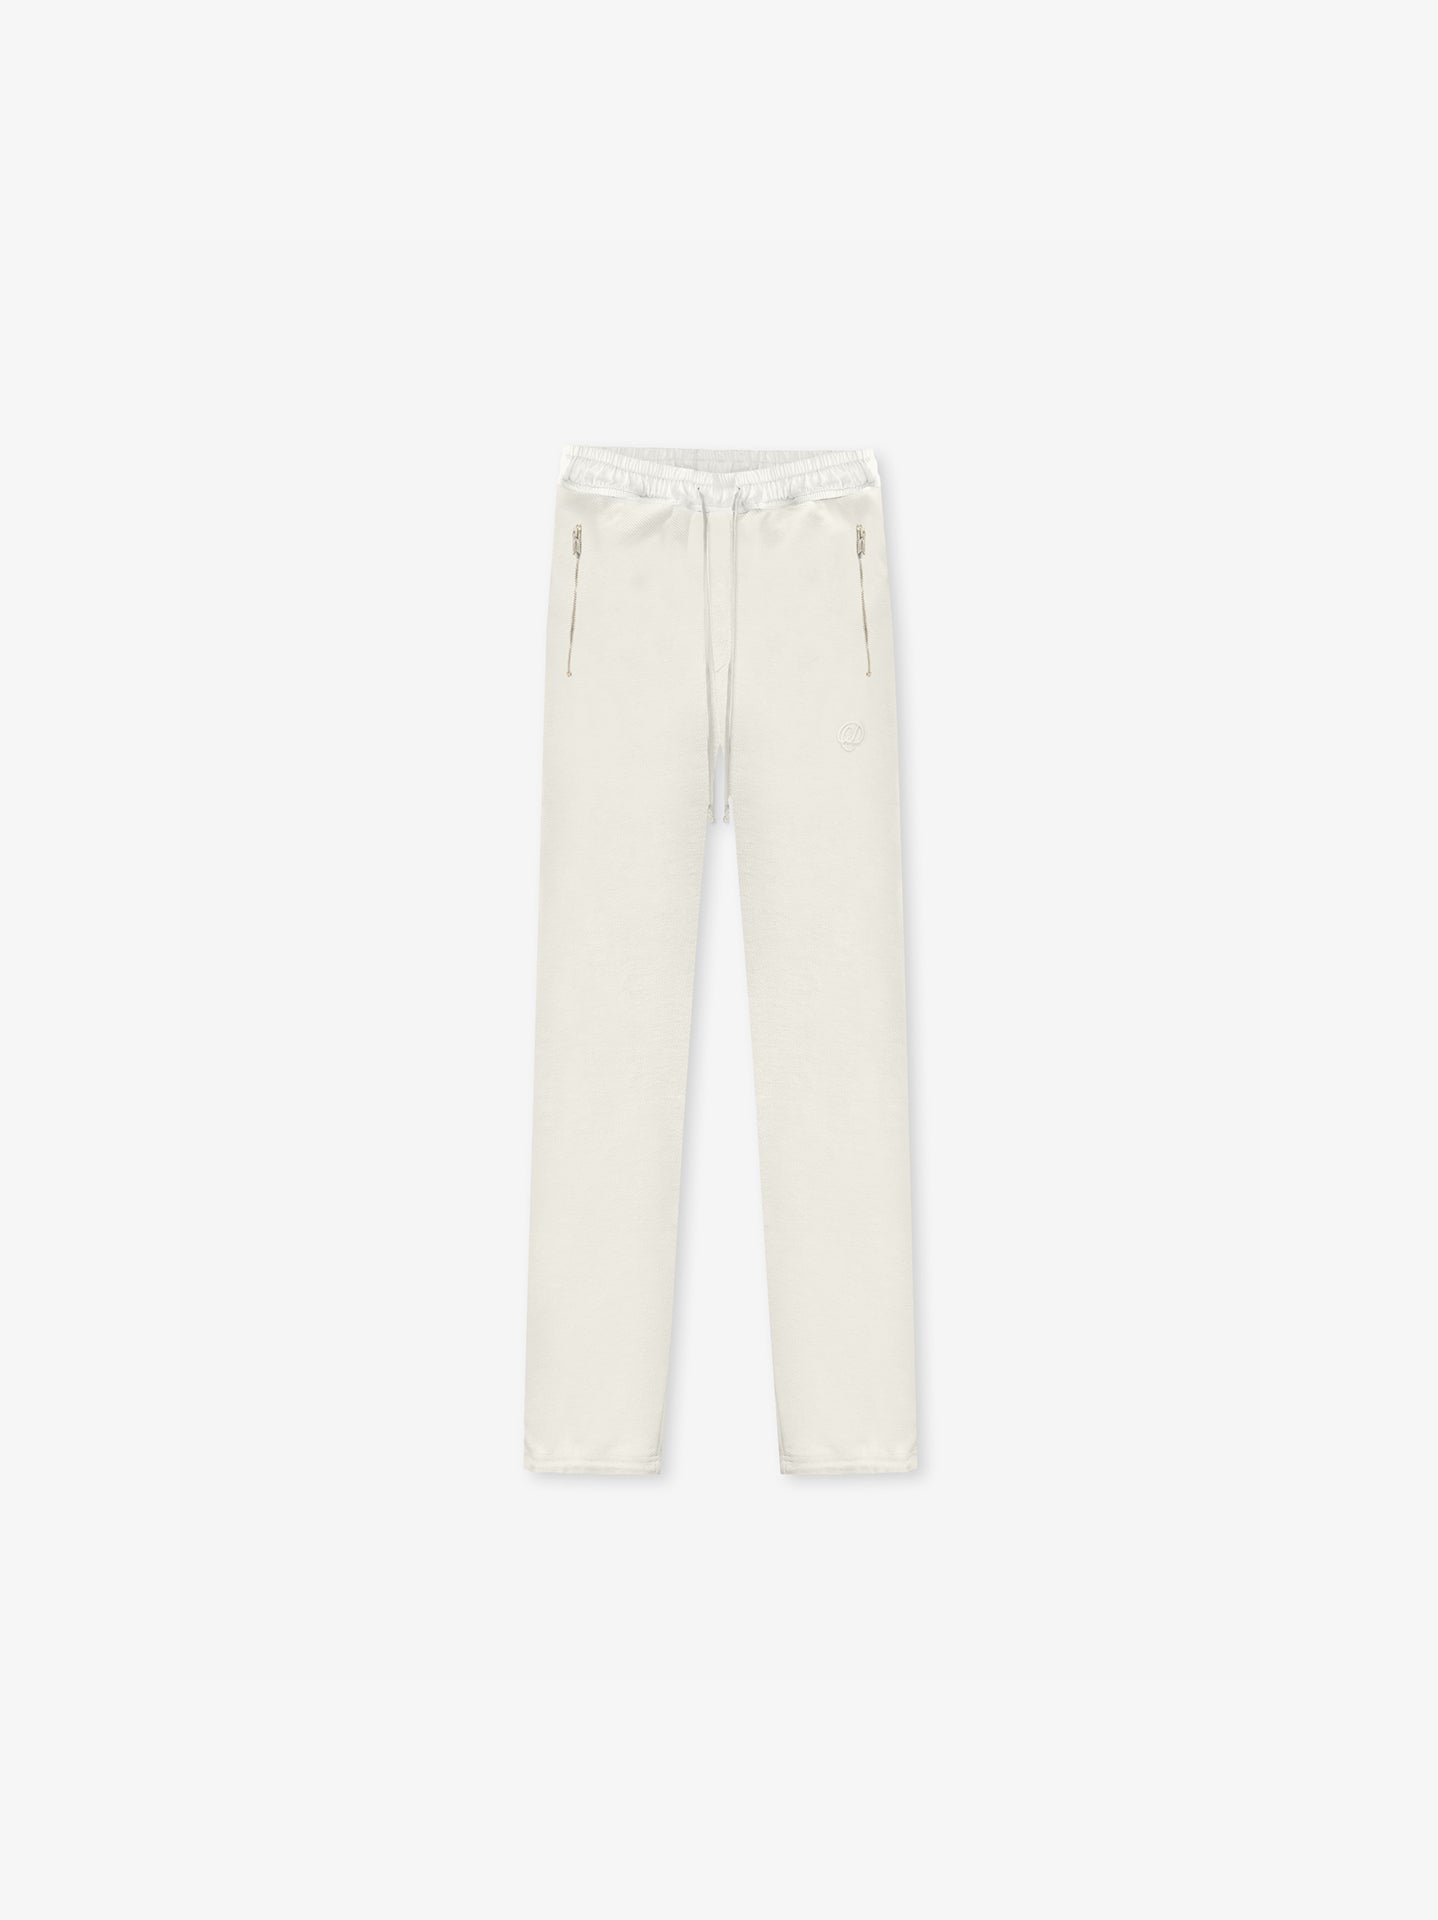 Inside Out Sweatpants - Off White